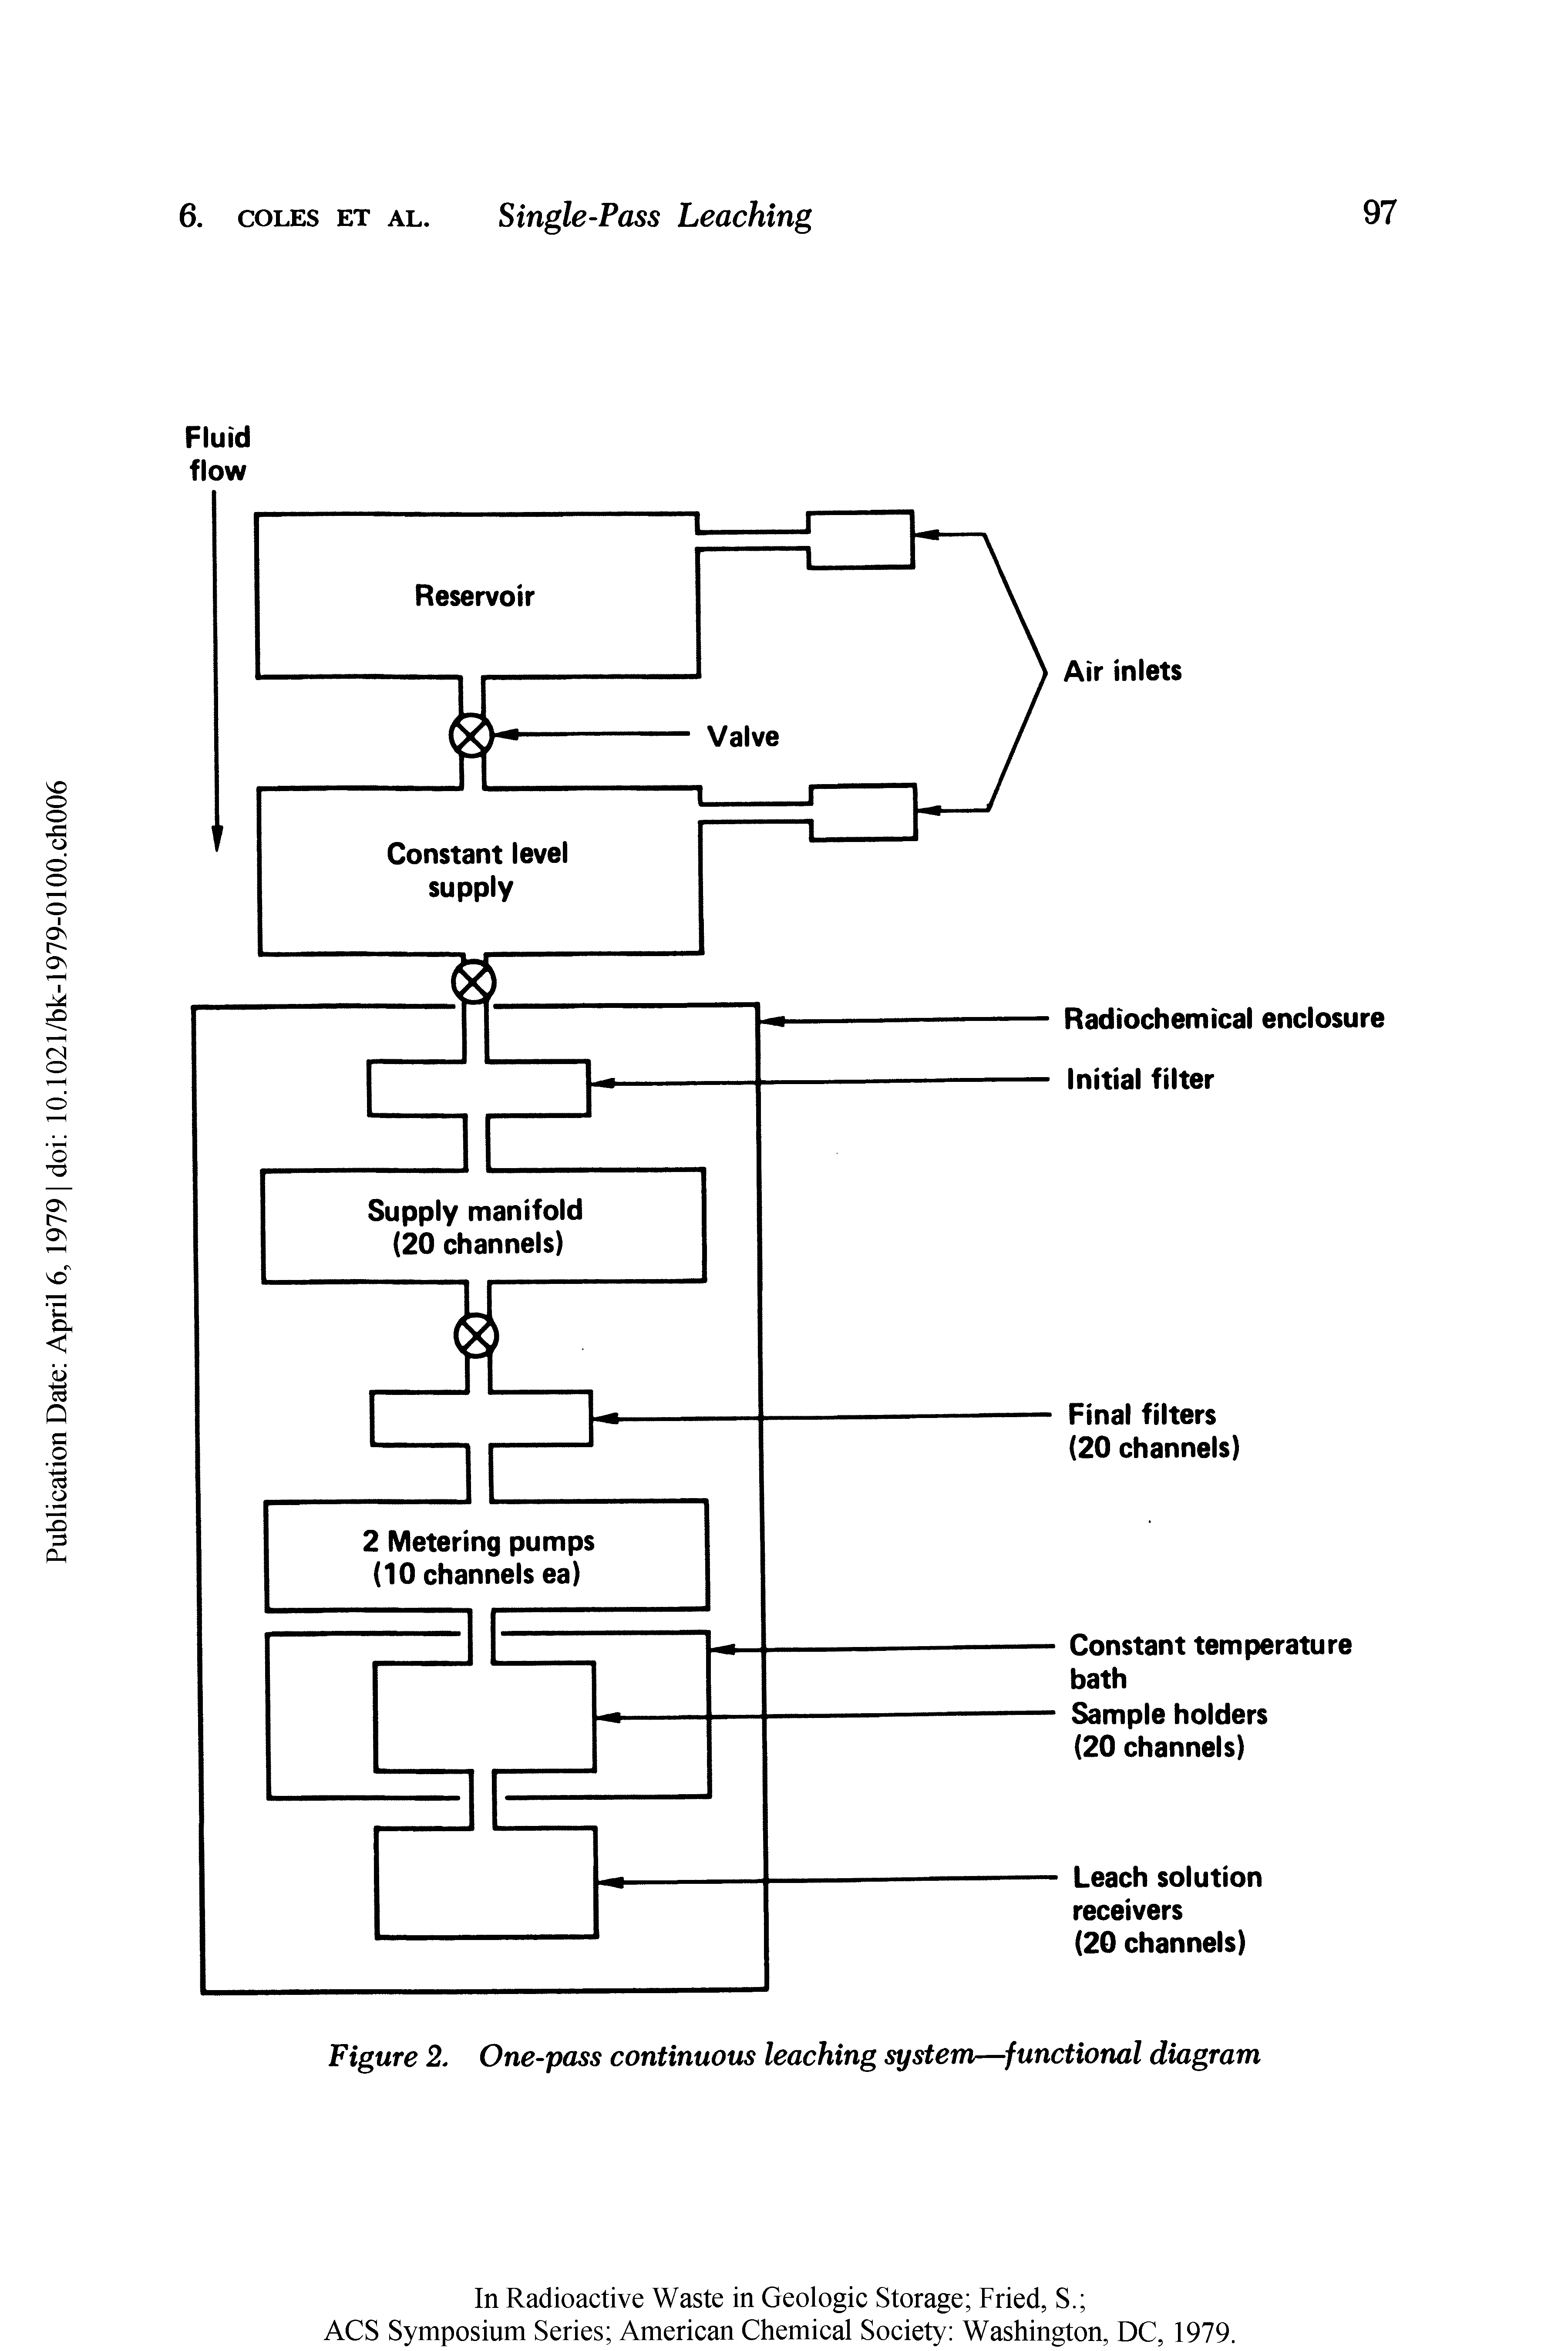 Figure 2. One-pass continuous leaching system—functional diagram...